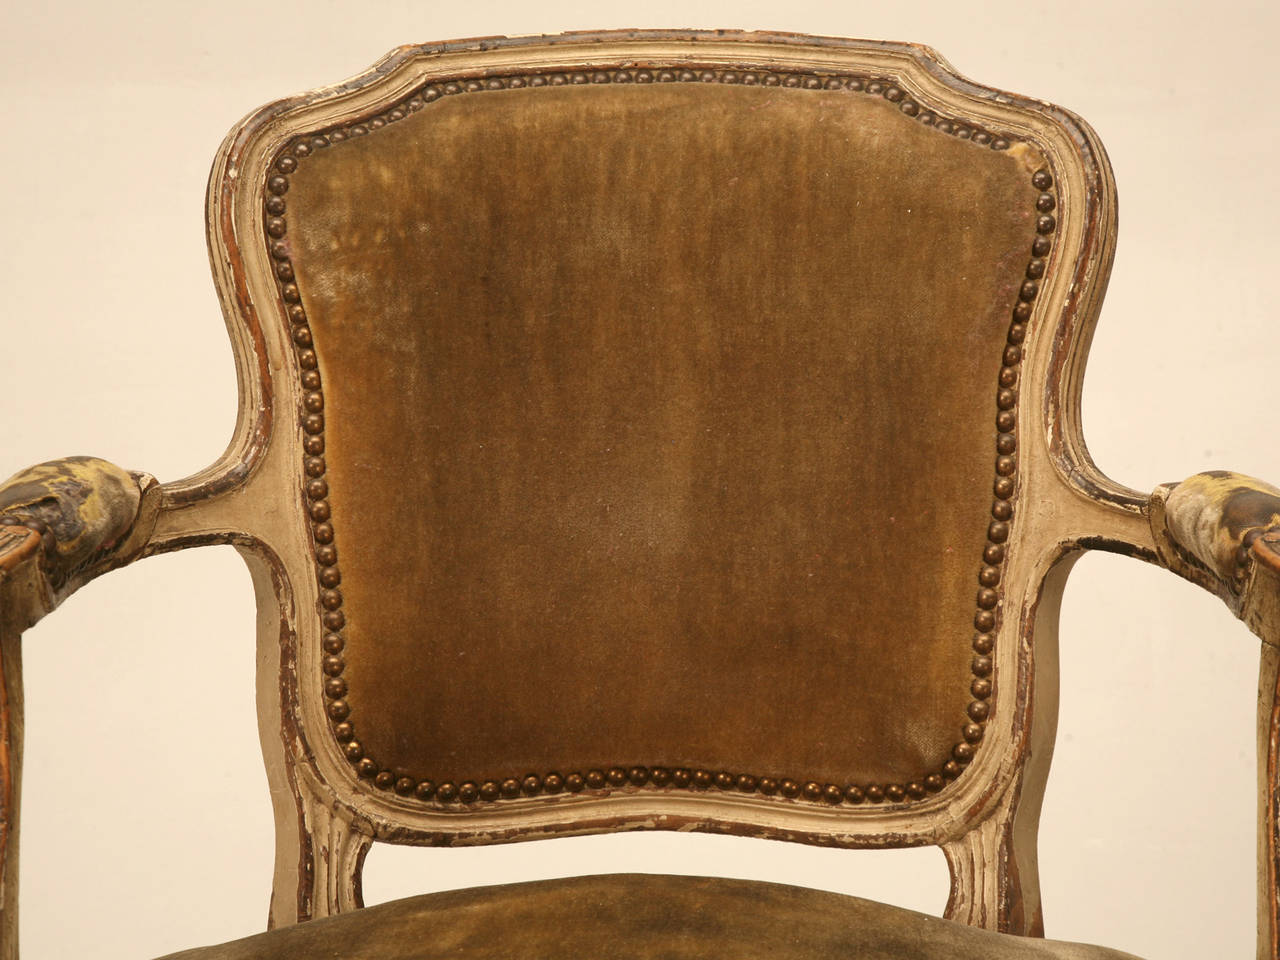 Circa 1820-1840 Louis XV style armchairs with unbelievable old paint, and in fact, the paint is so good and authentic we are studying it to see how well we can duplicate it. There is old paint, and there is paint restoration like some dealers prefer